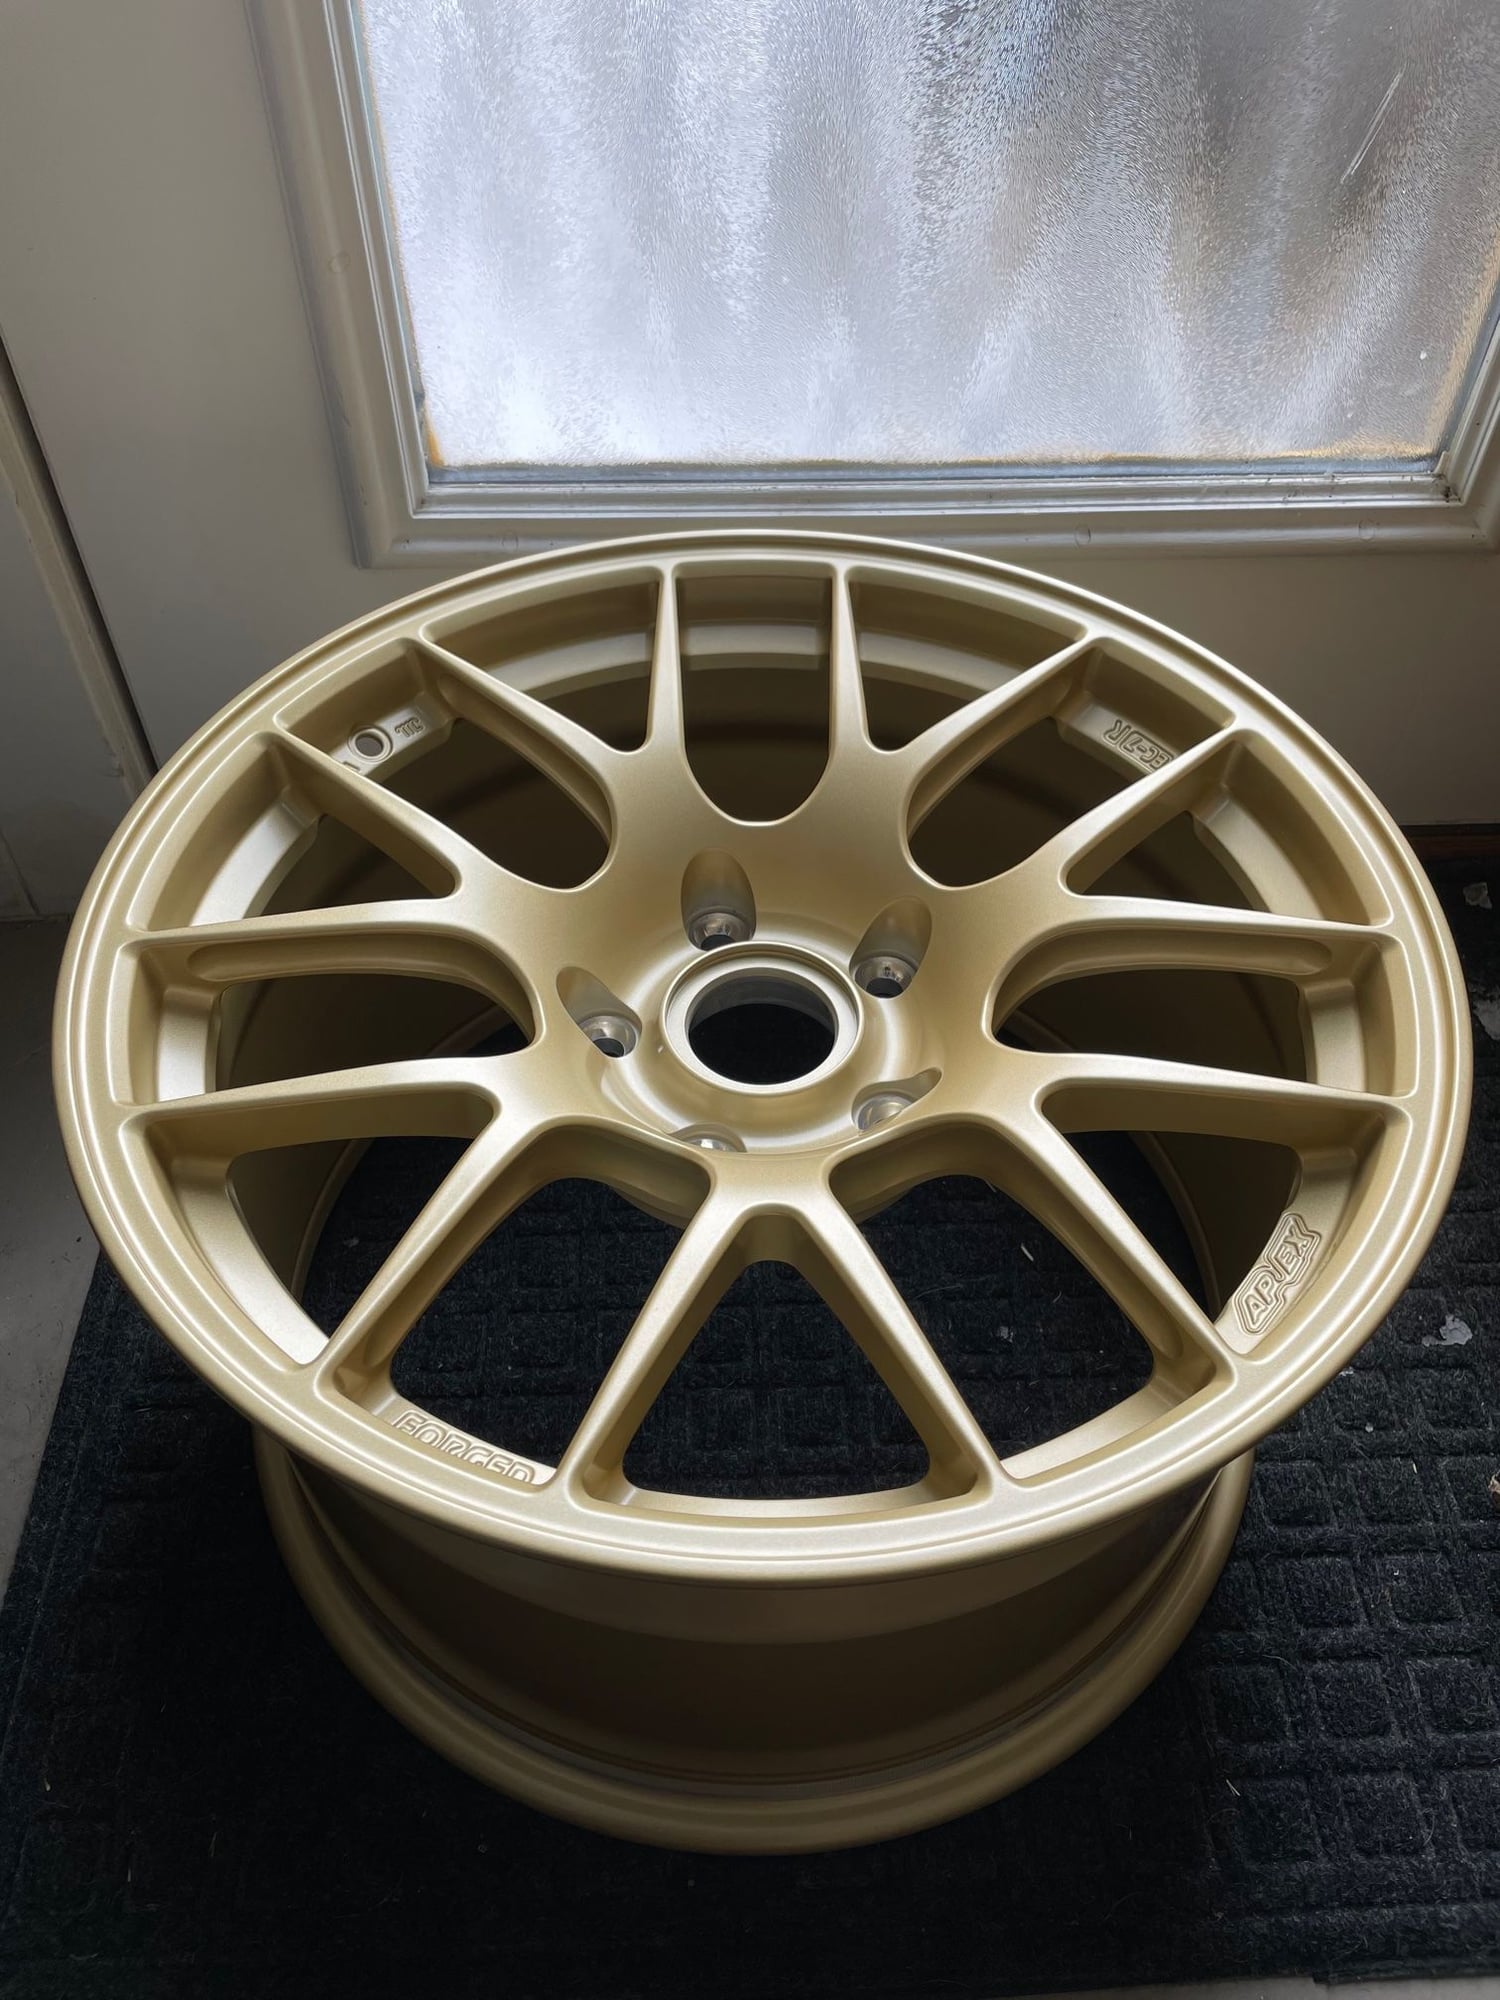 Wheels and Tires/Axles - Apex EC-7R 18x9 +46 / 18x10.5 +44 in Gold - New - All Years Porsche All Models - Denver, CO 80204, United States